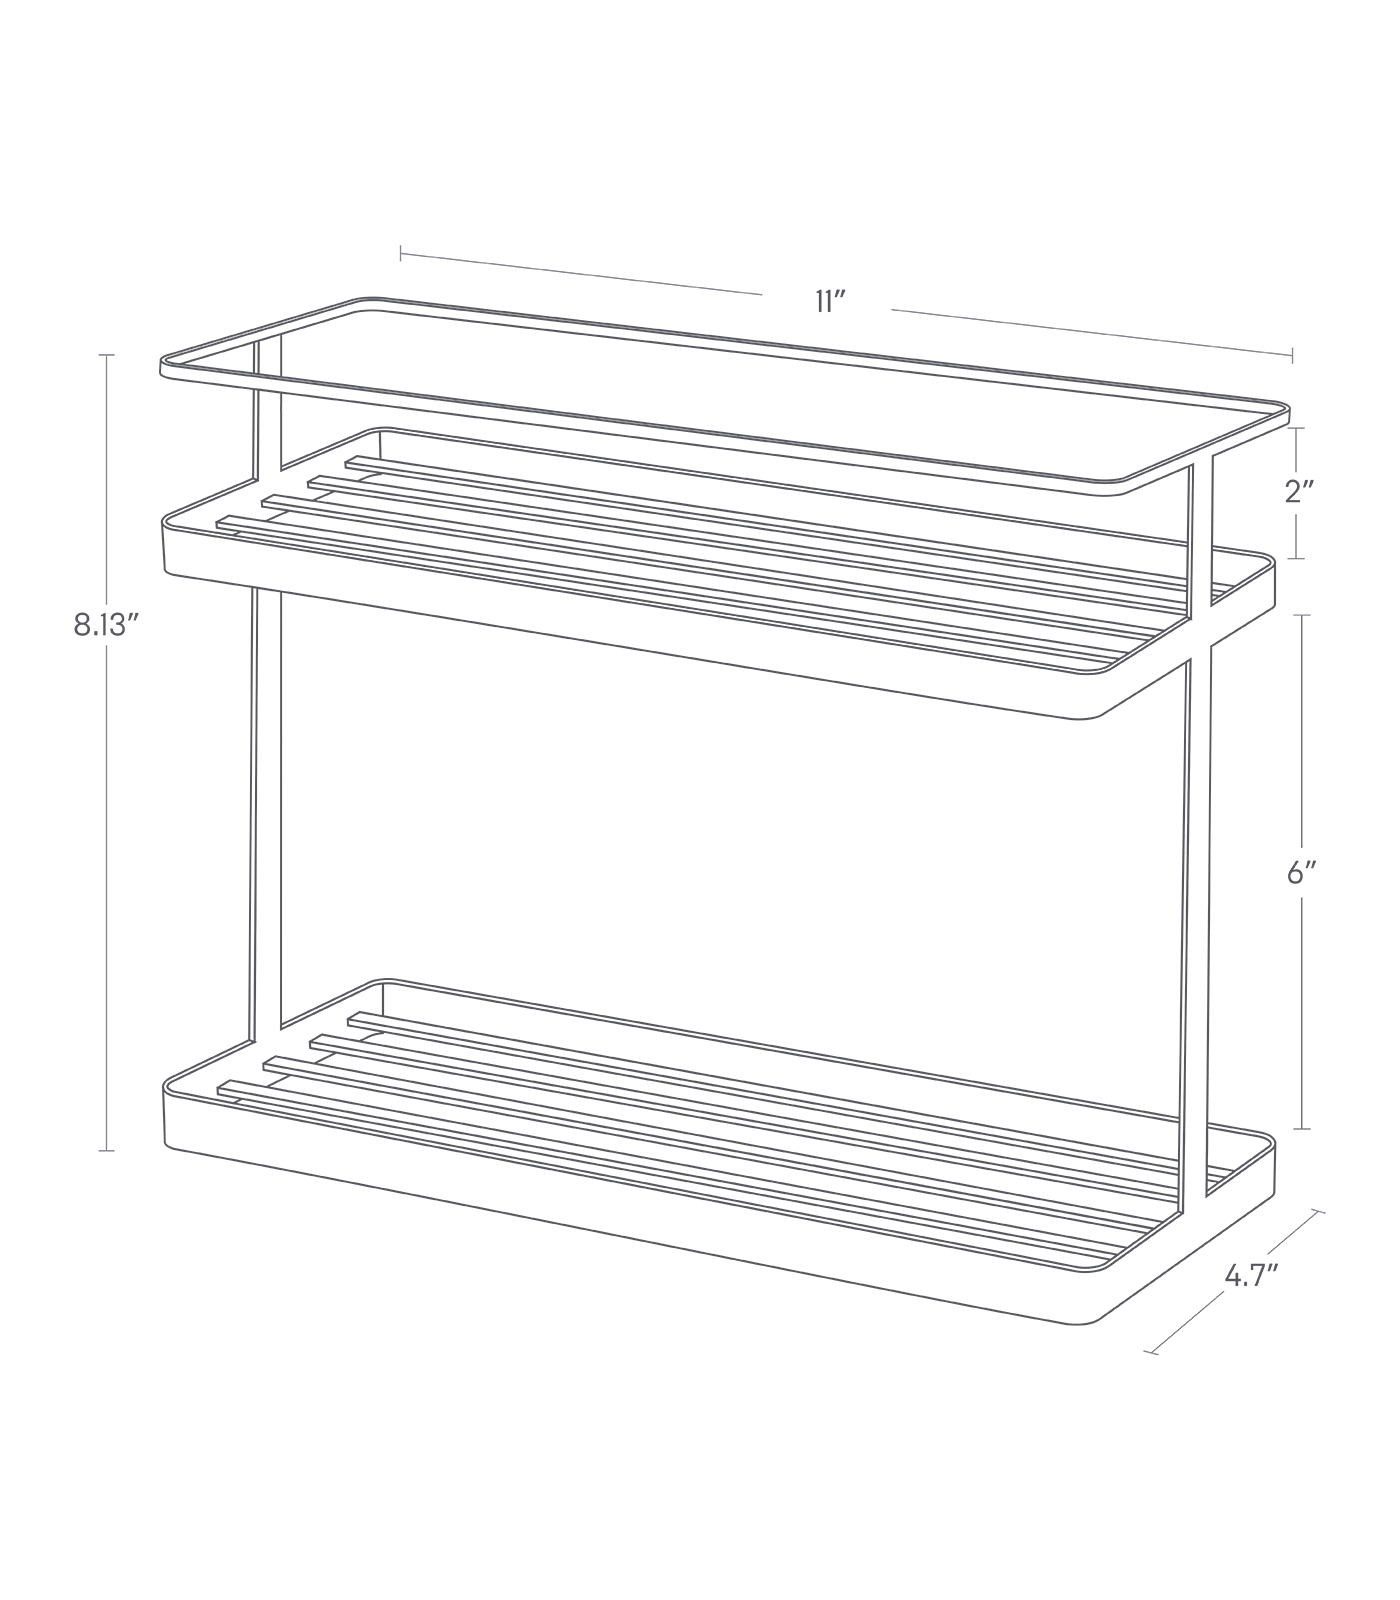 Dimenision image for Countertop Organizer Rackon a white background showing total width of 11